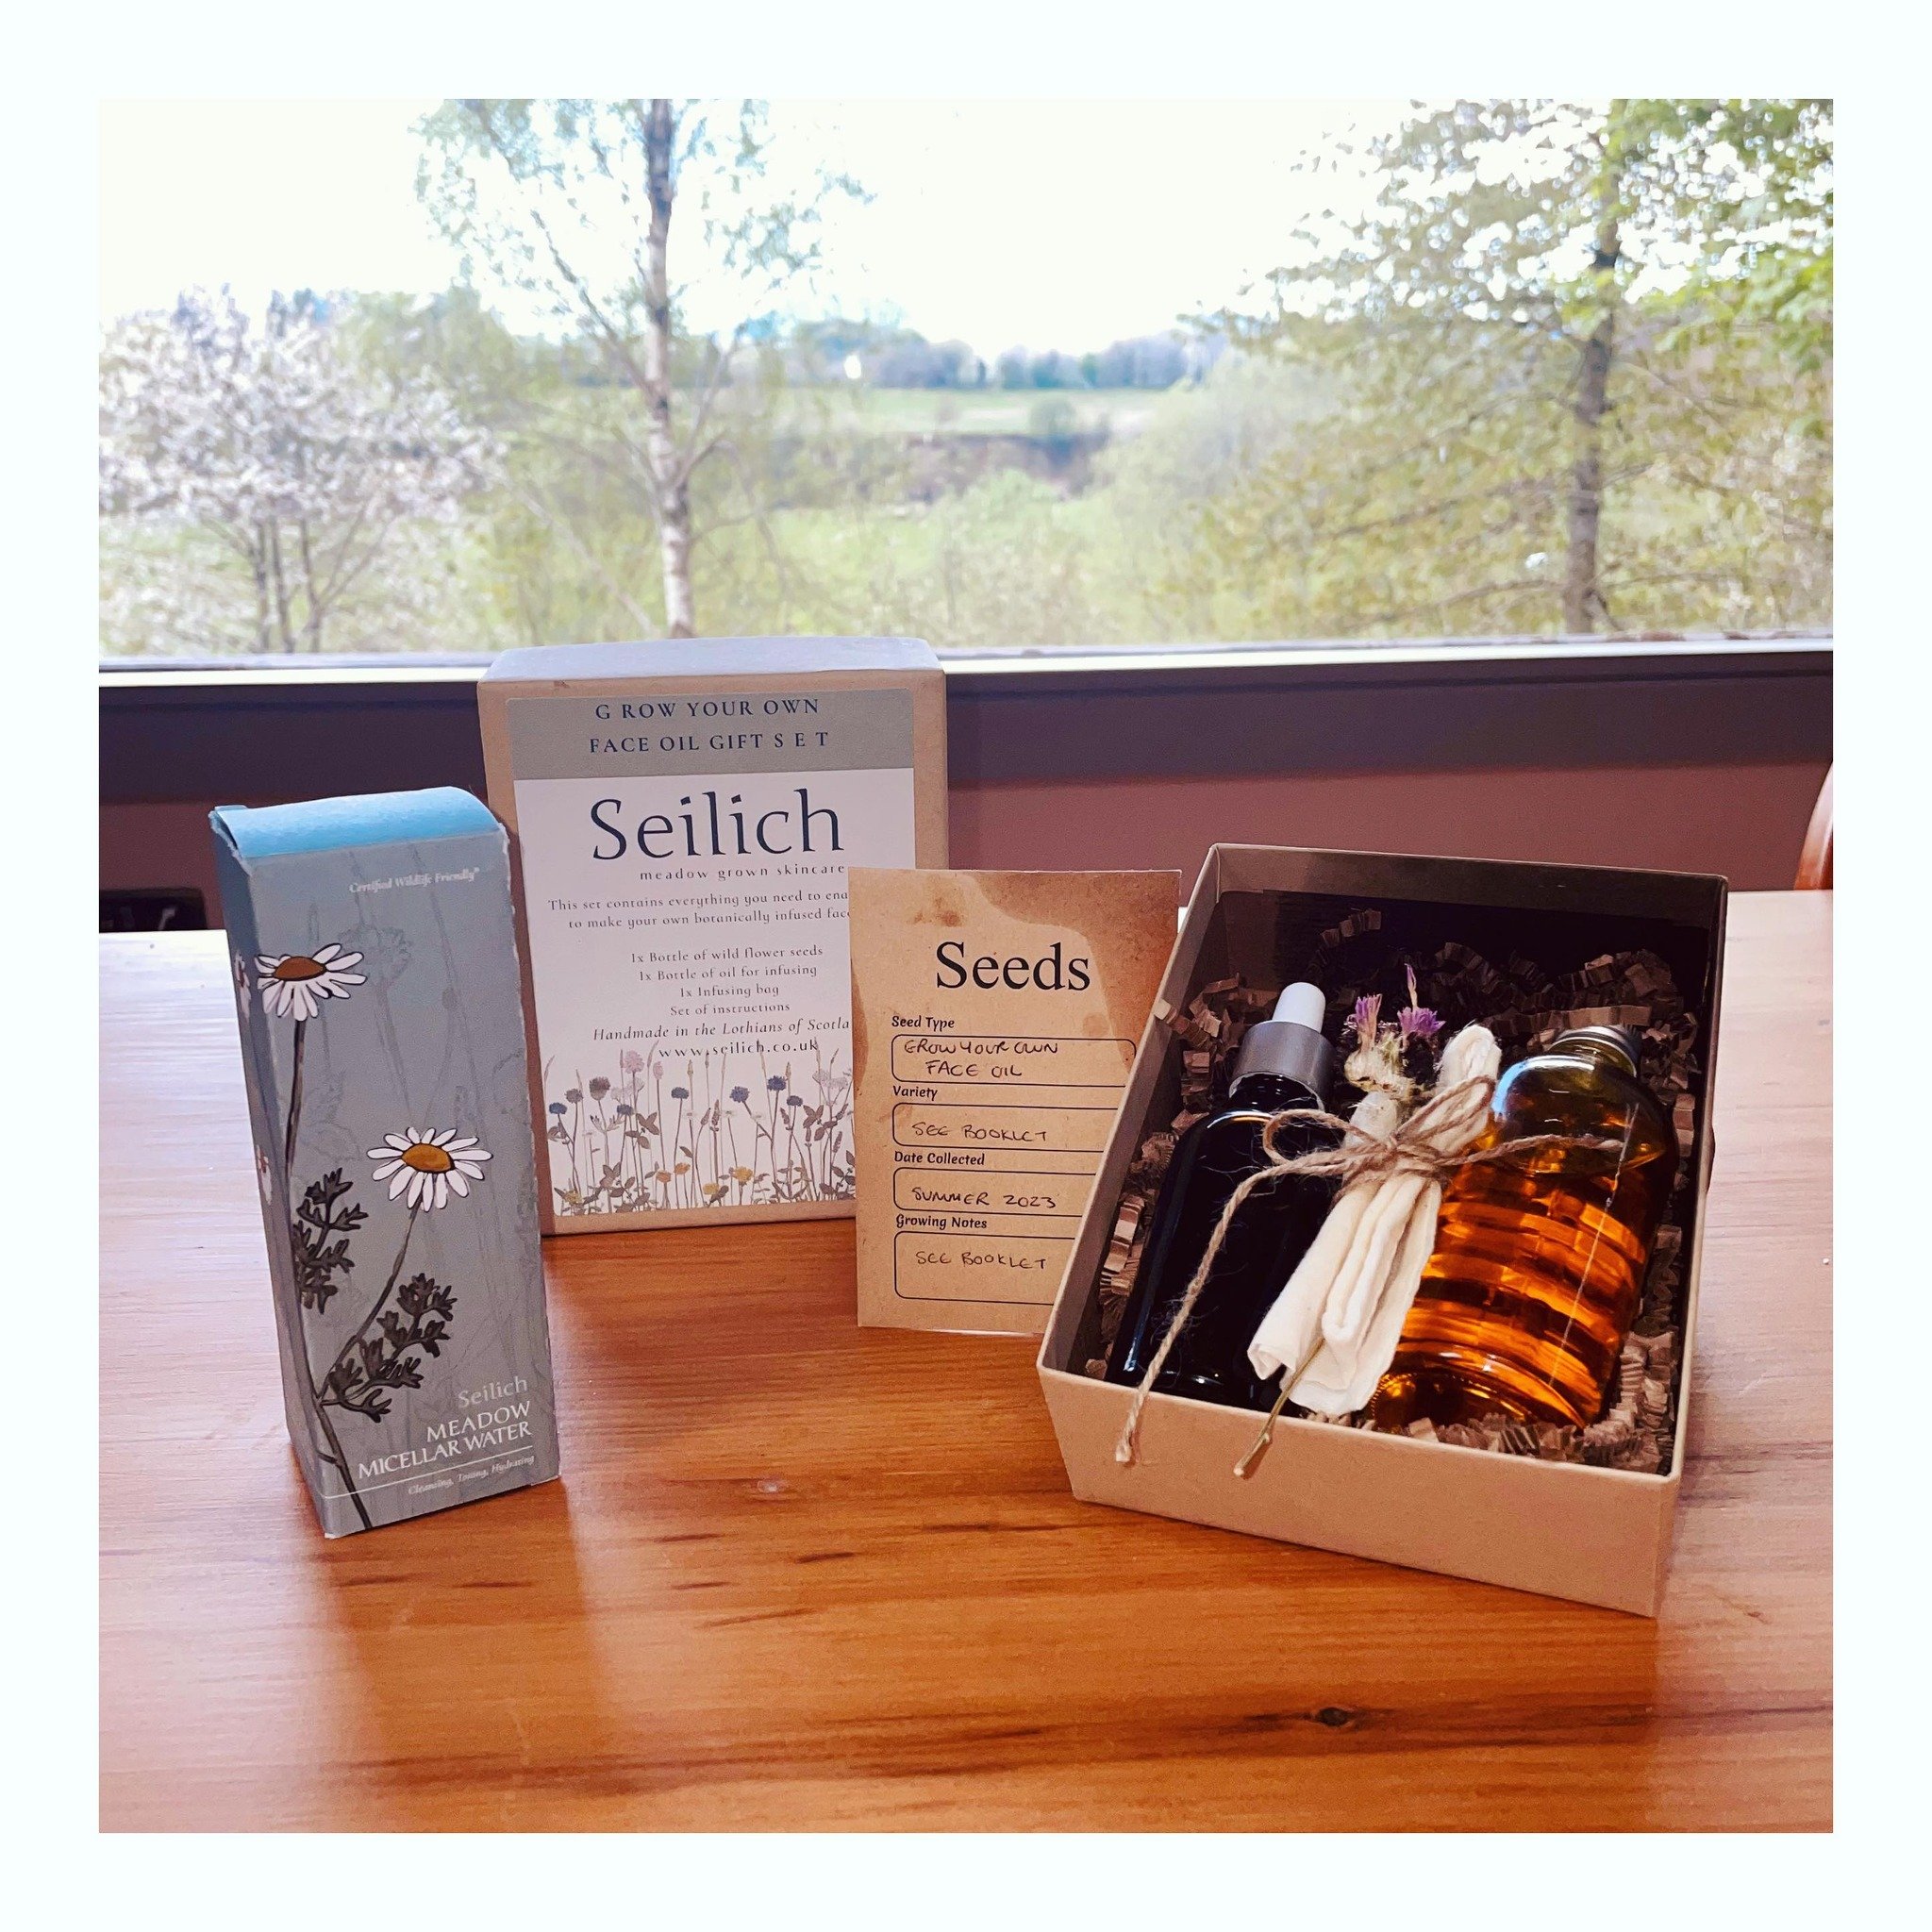 A gorgeous sample package from award-winning @seilich_botanicals arrived into the store.  Their own Scottish-based wildflower meadow provides the ingredients that go into their all-natural, sustainable skincare + herbal teas.  The grow-your-own face 